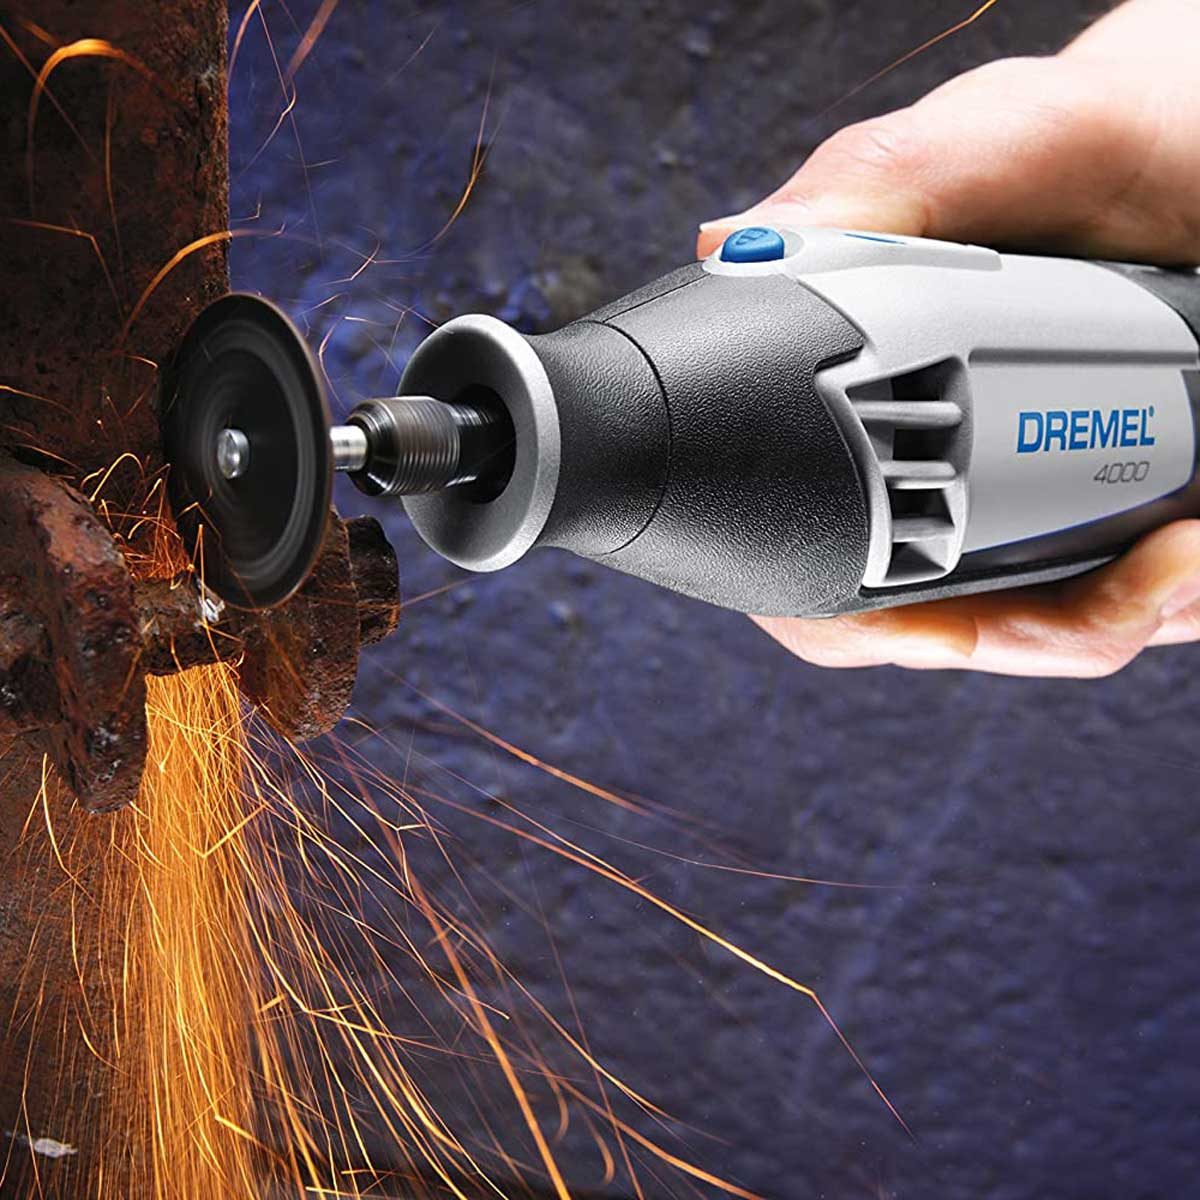 Ways to Use Your Rotary Tool That Will Have People Buzzing